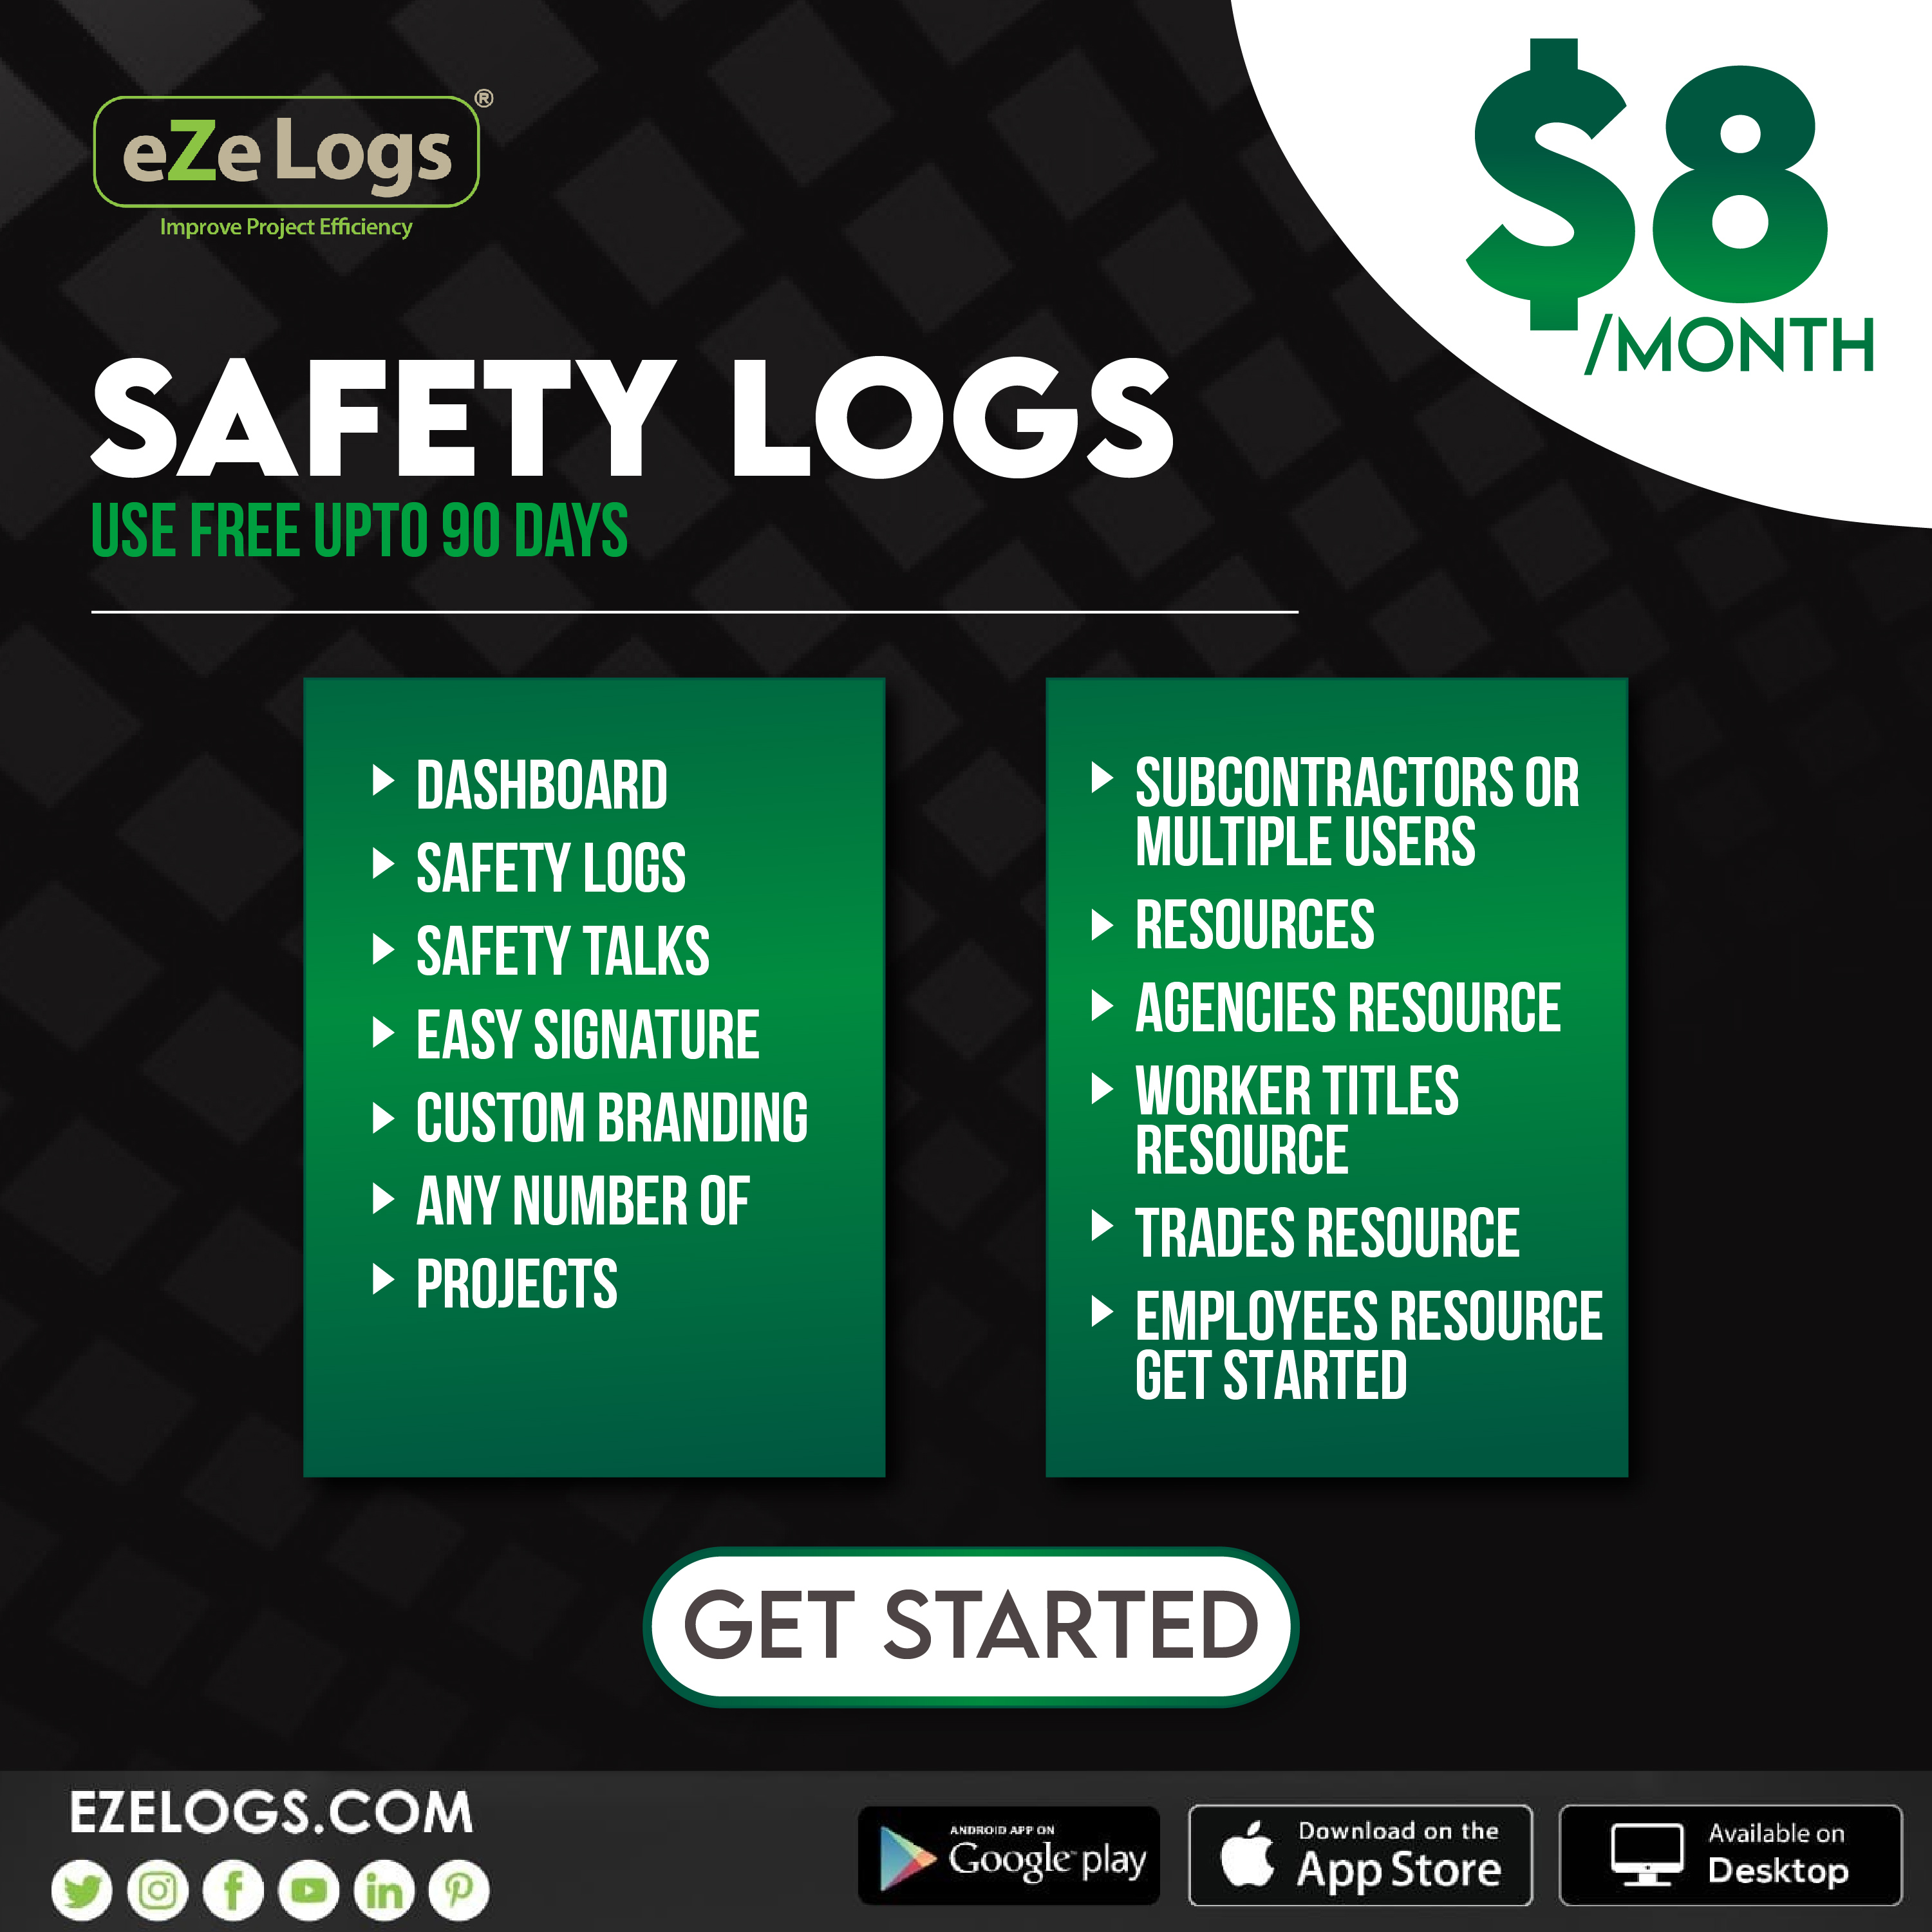 Safety logs- To meet OSHA Safety Compliance a site safety competent person check all job site conditions as per the check list, record with photos of any unsafe conditions and submit report. Print report in pdf and notify to all stake holders by email.